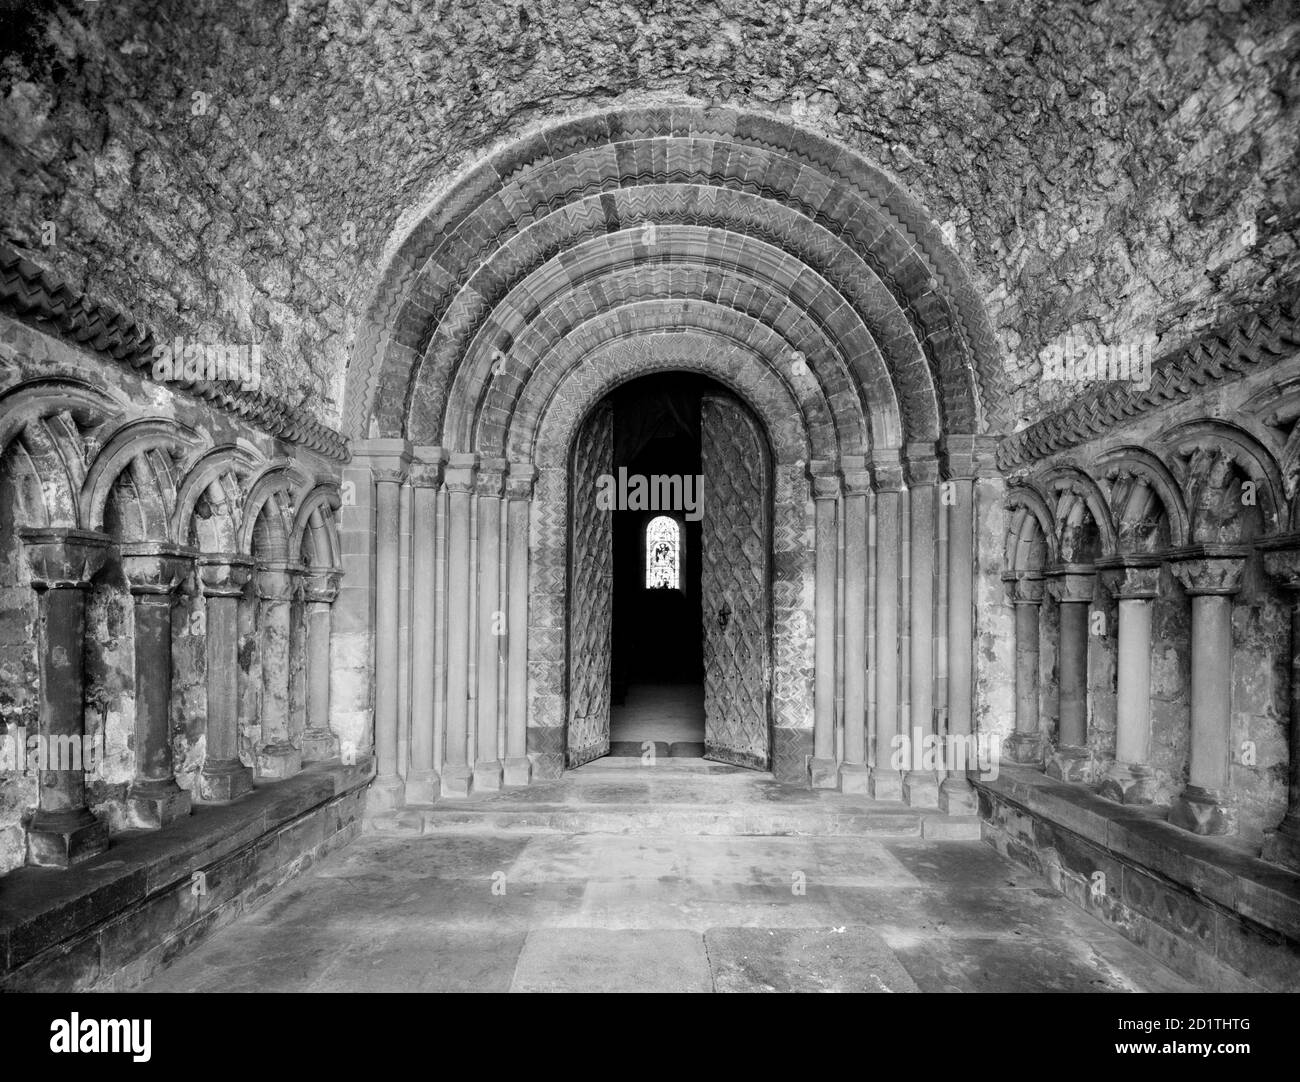 SOUTHWELL MINSTER, Nottinghamshire. The interior of the Norman north porch looking toward the elaborate zig-zag five order doorway with a tunnel vaulted roof. The minster was founded before the Conquest in the 950s, and afterwards became one the major churches of the region. Photographed by Henry Taunt (active 1860-1922). Stock Photo